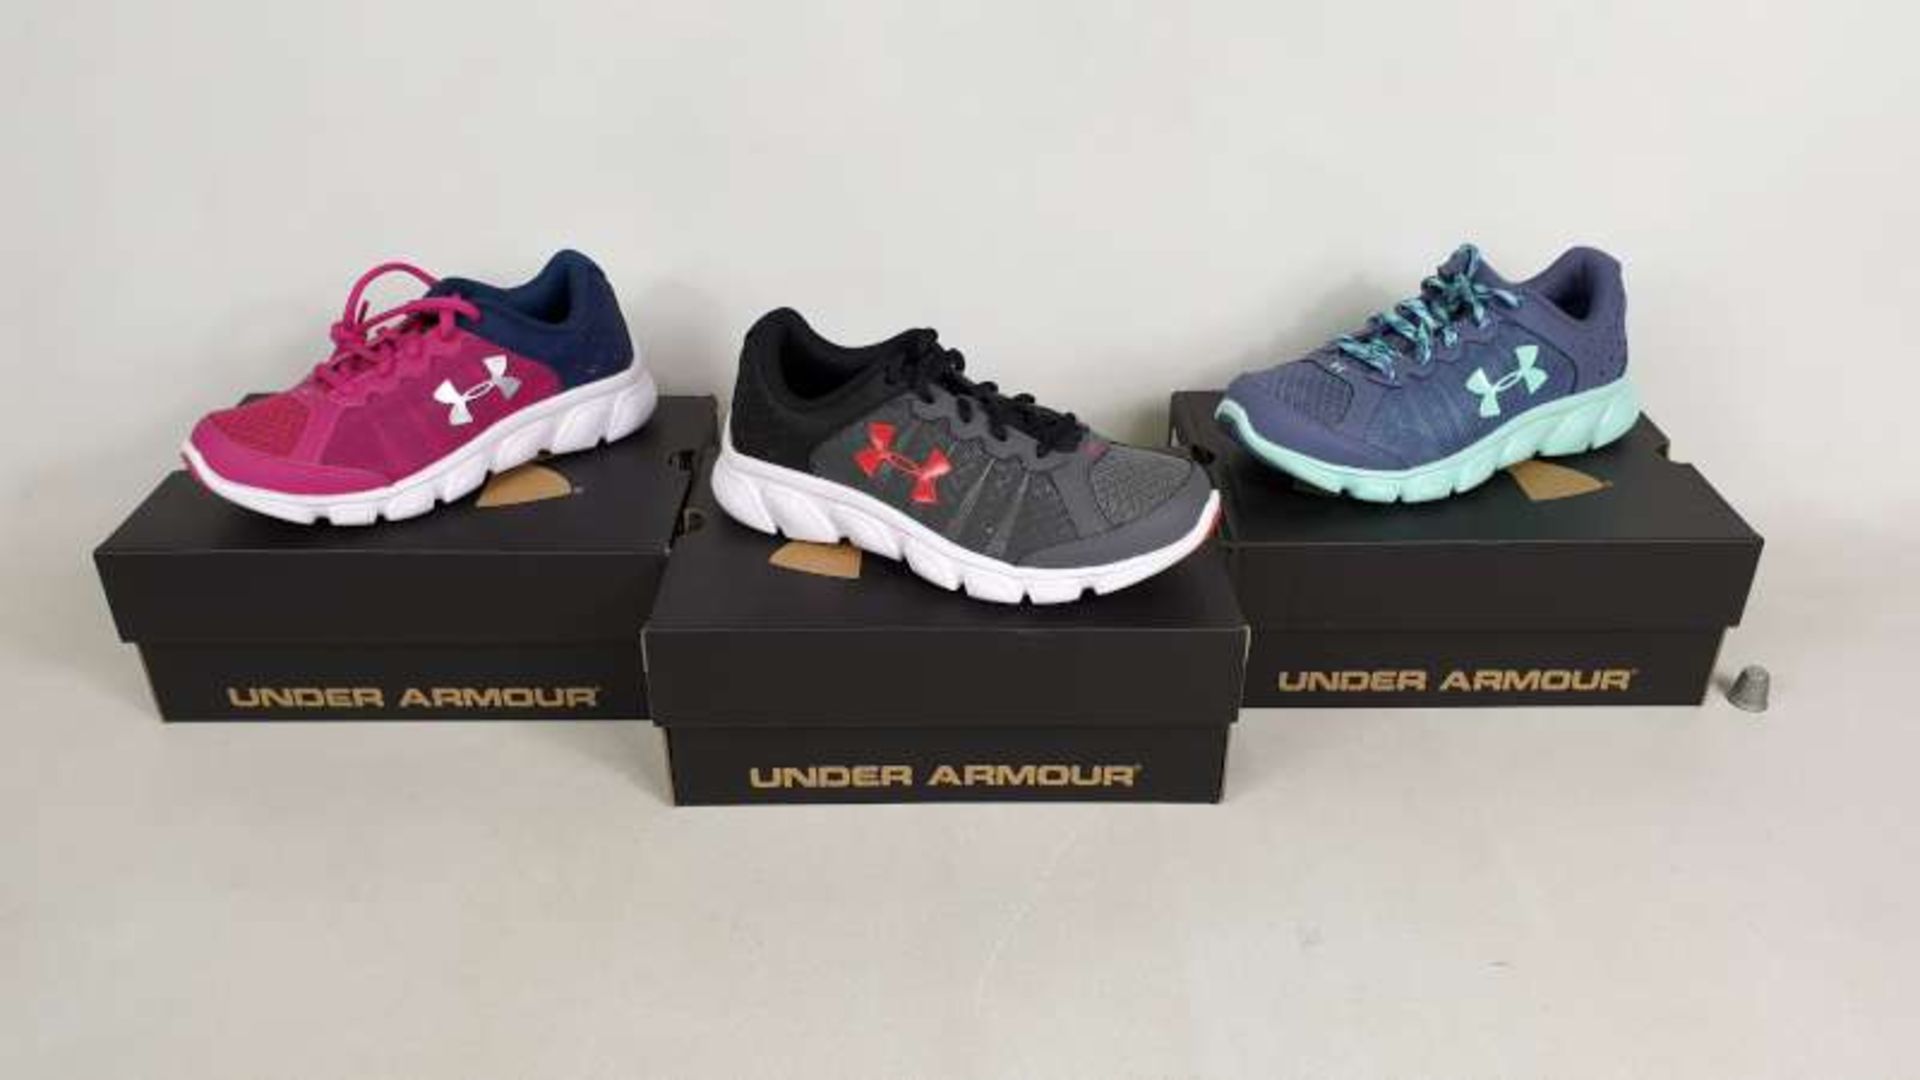 10 X BRAND NEW UNDER ARMOUR CHILDRENS TRAINERS IN VARIOUS STYLES AND SIZES